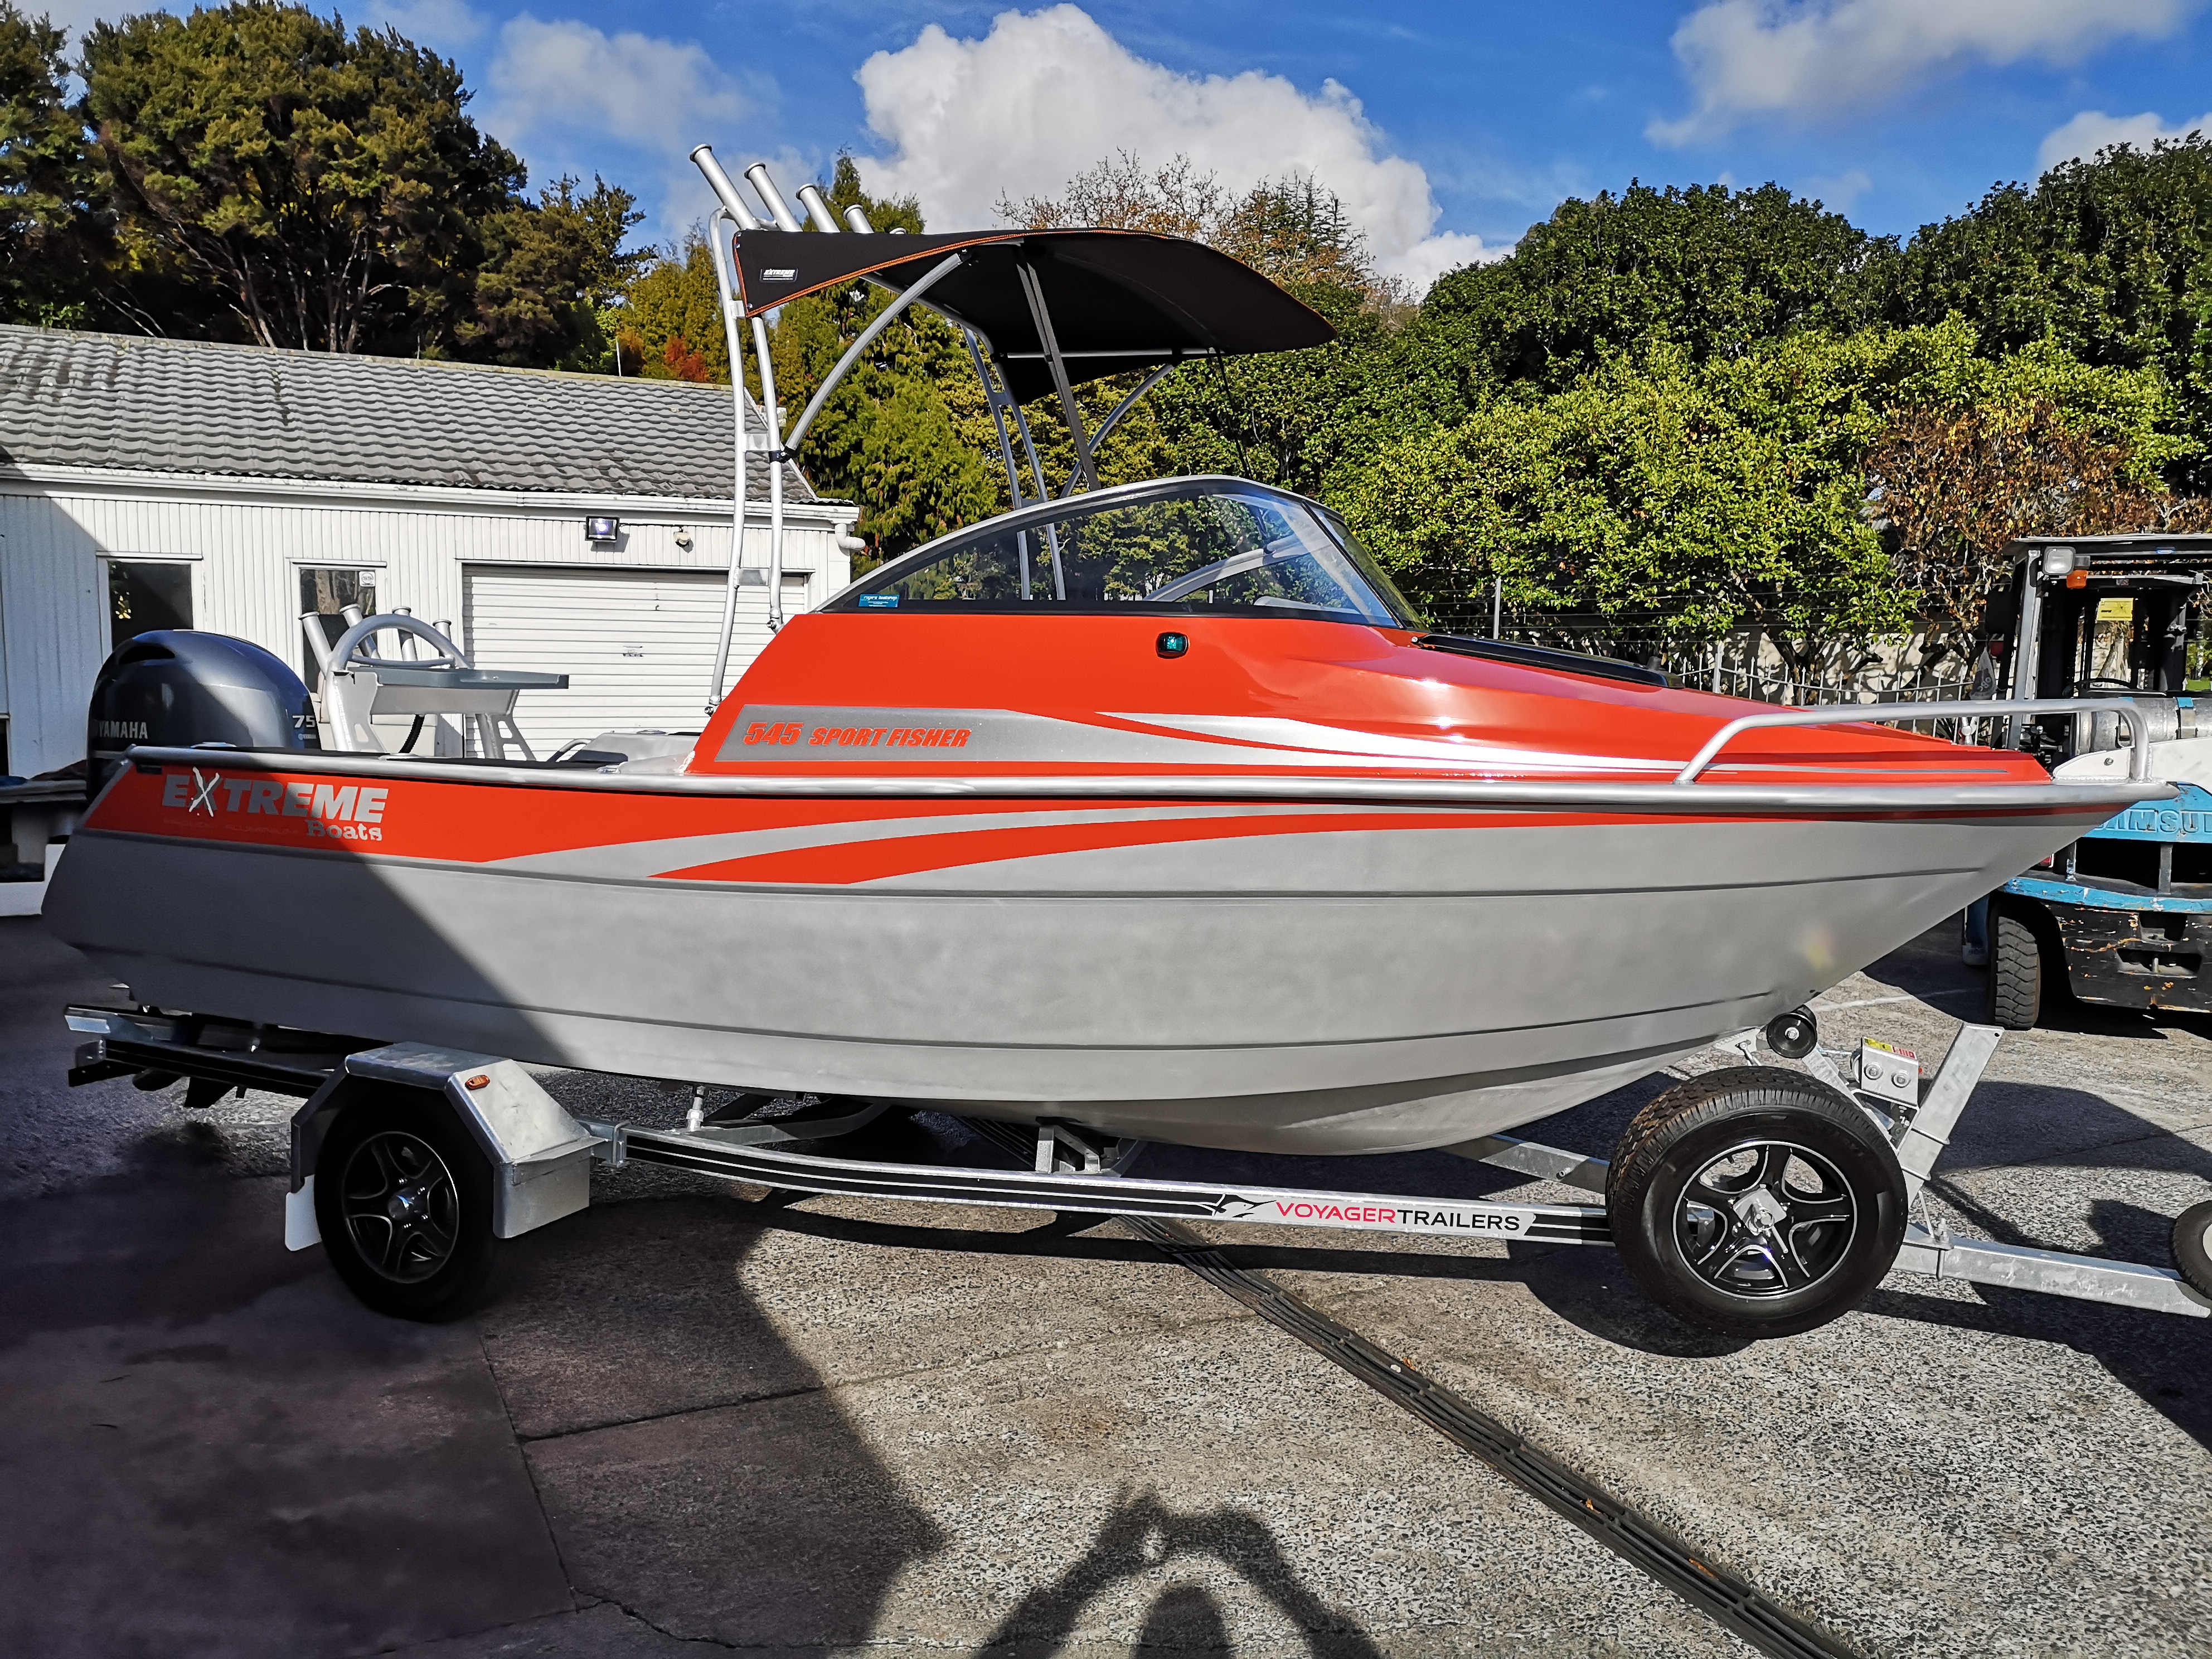 Rogers Boatshop: Extreme / 545 SPORTS FISHER PACKAGE / 2020